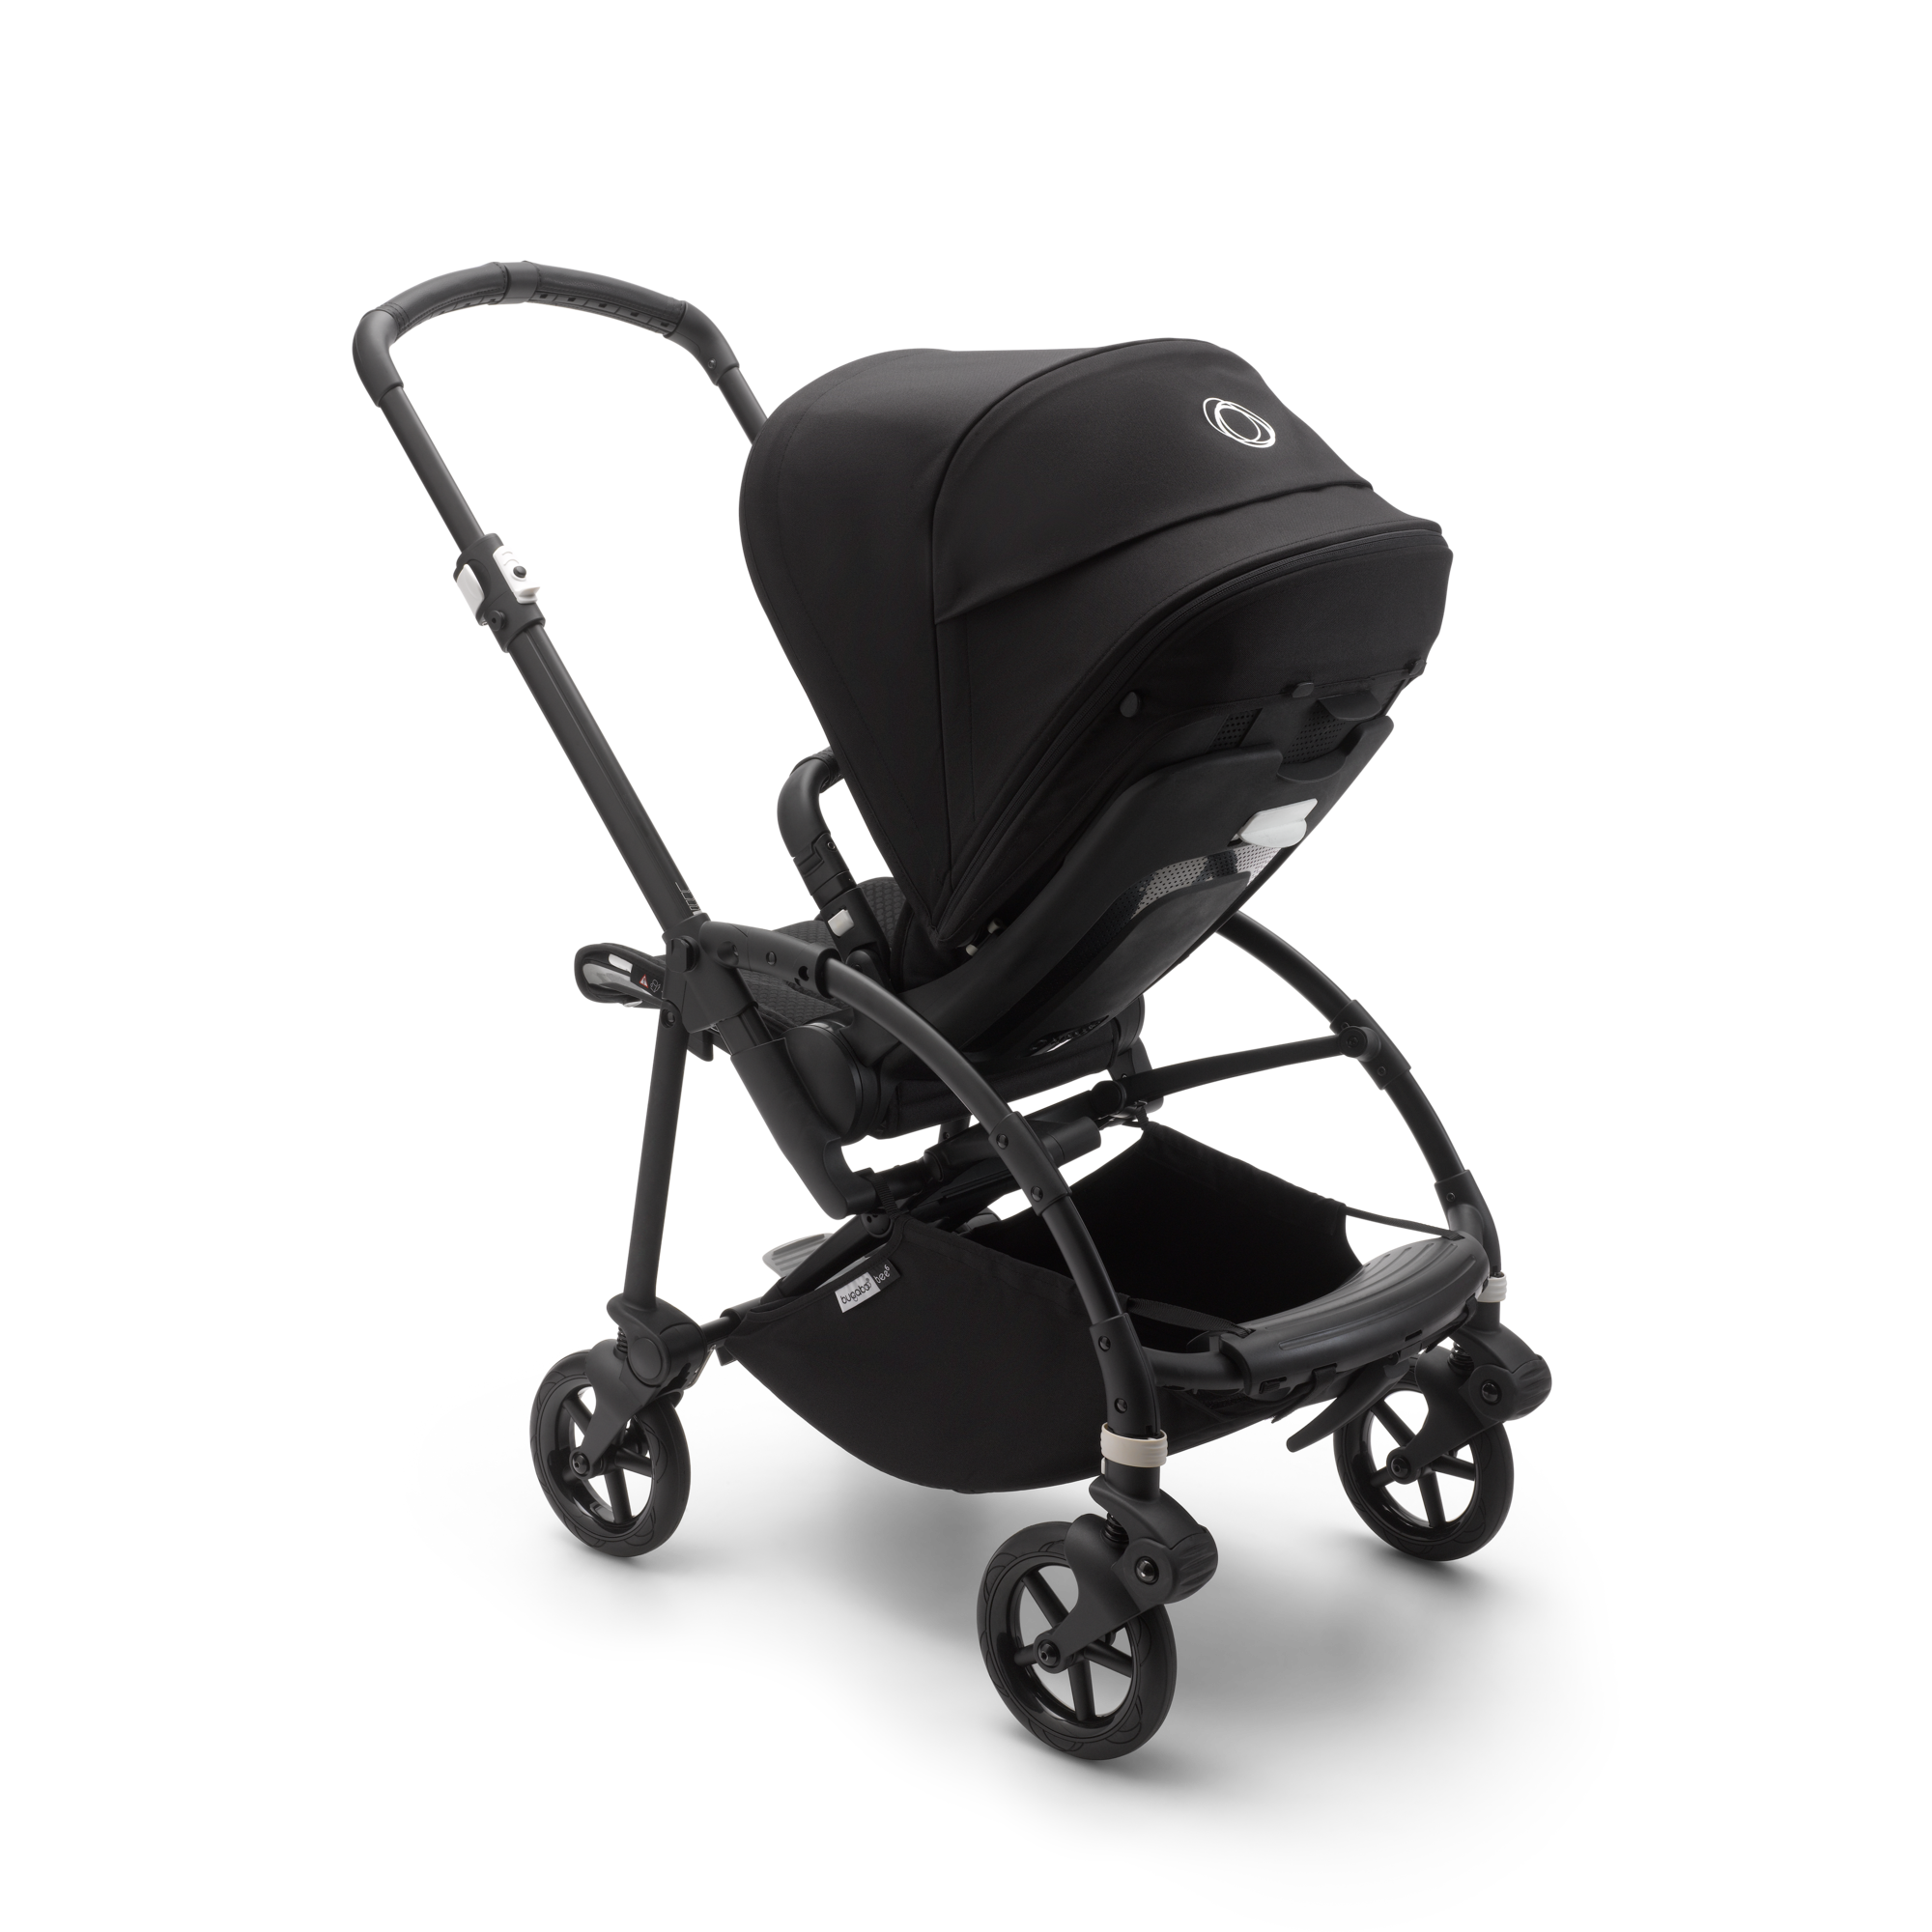 Bugaboo Bee 6 Review: Is This Stroller Worth it? - Sharifa Samora